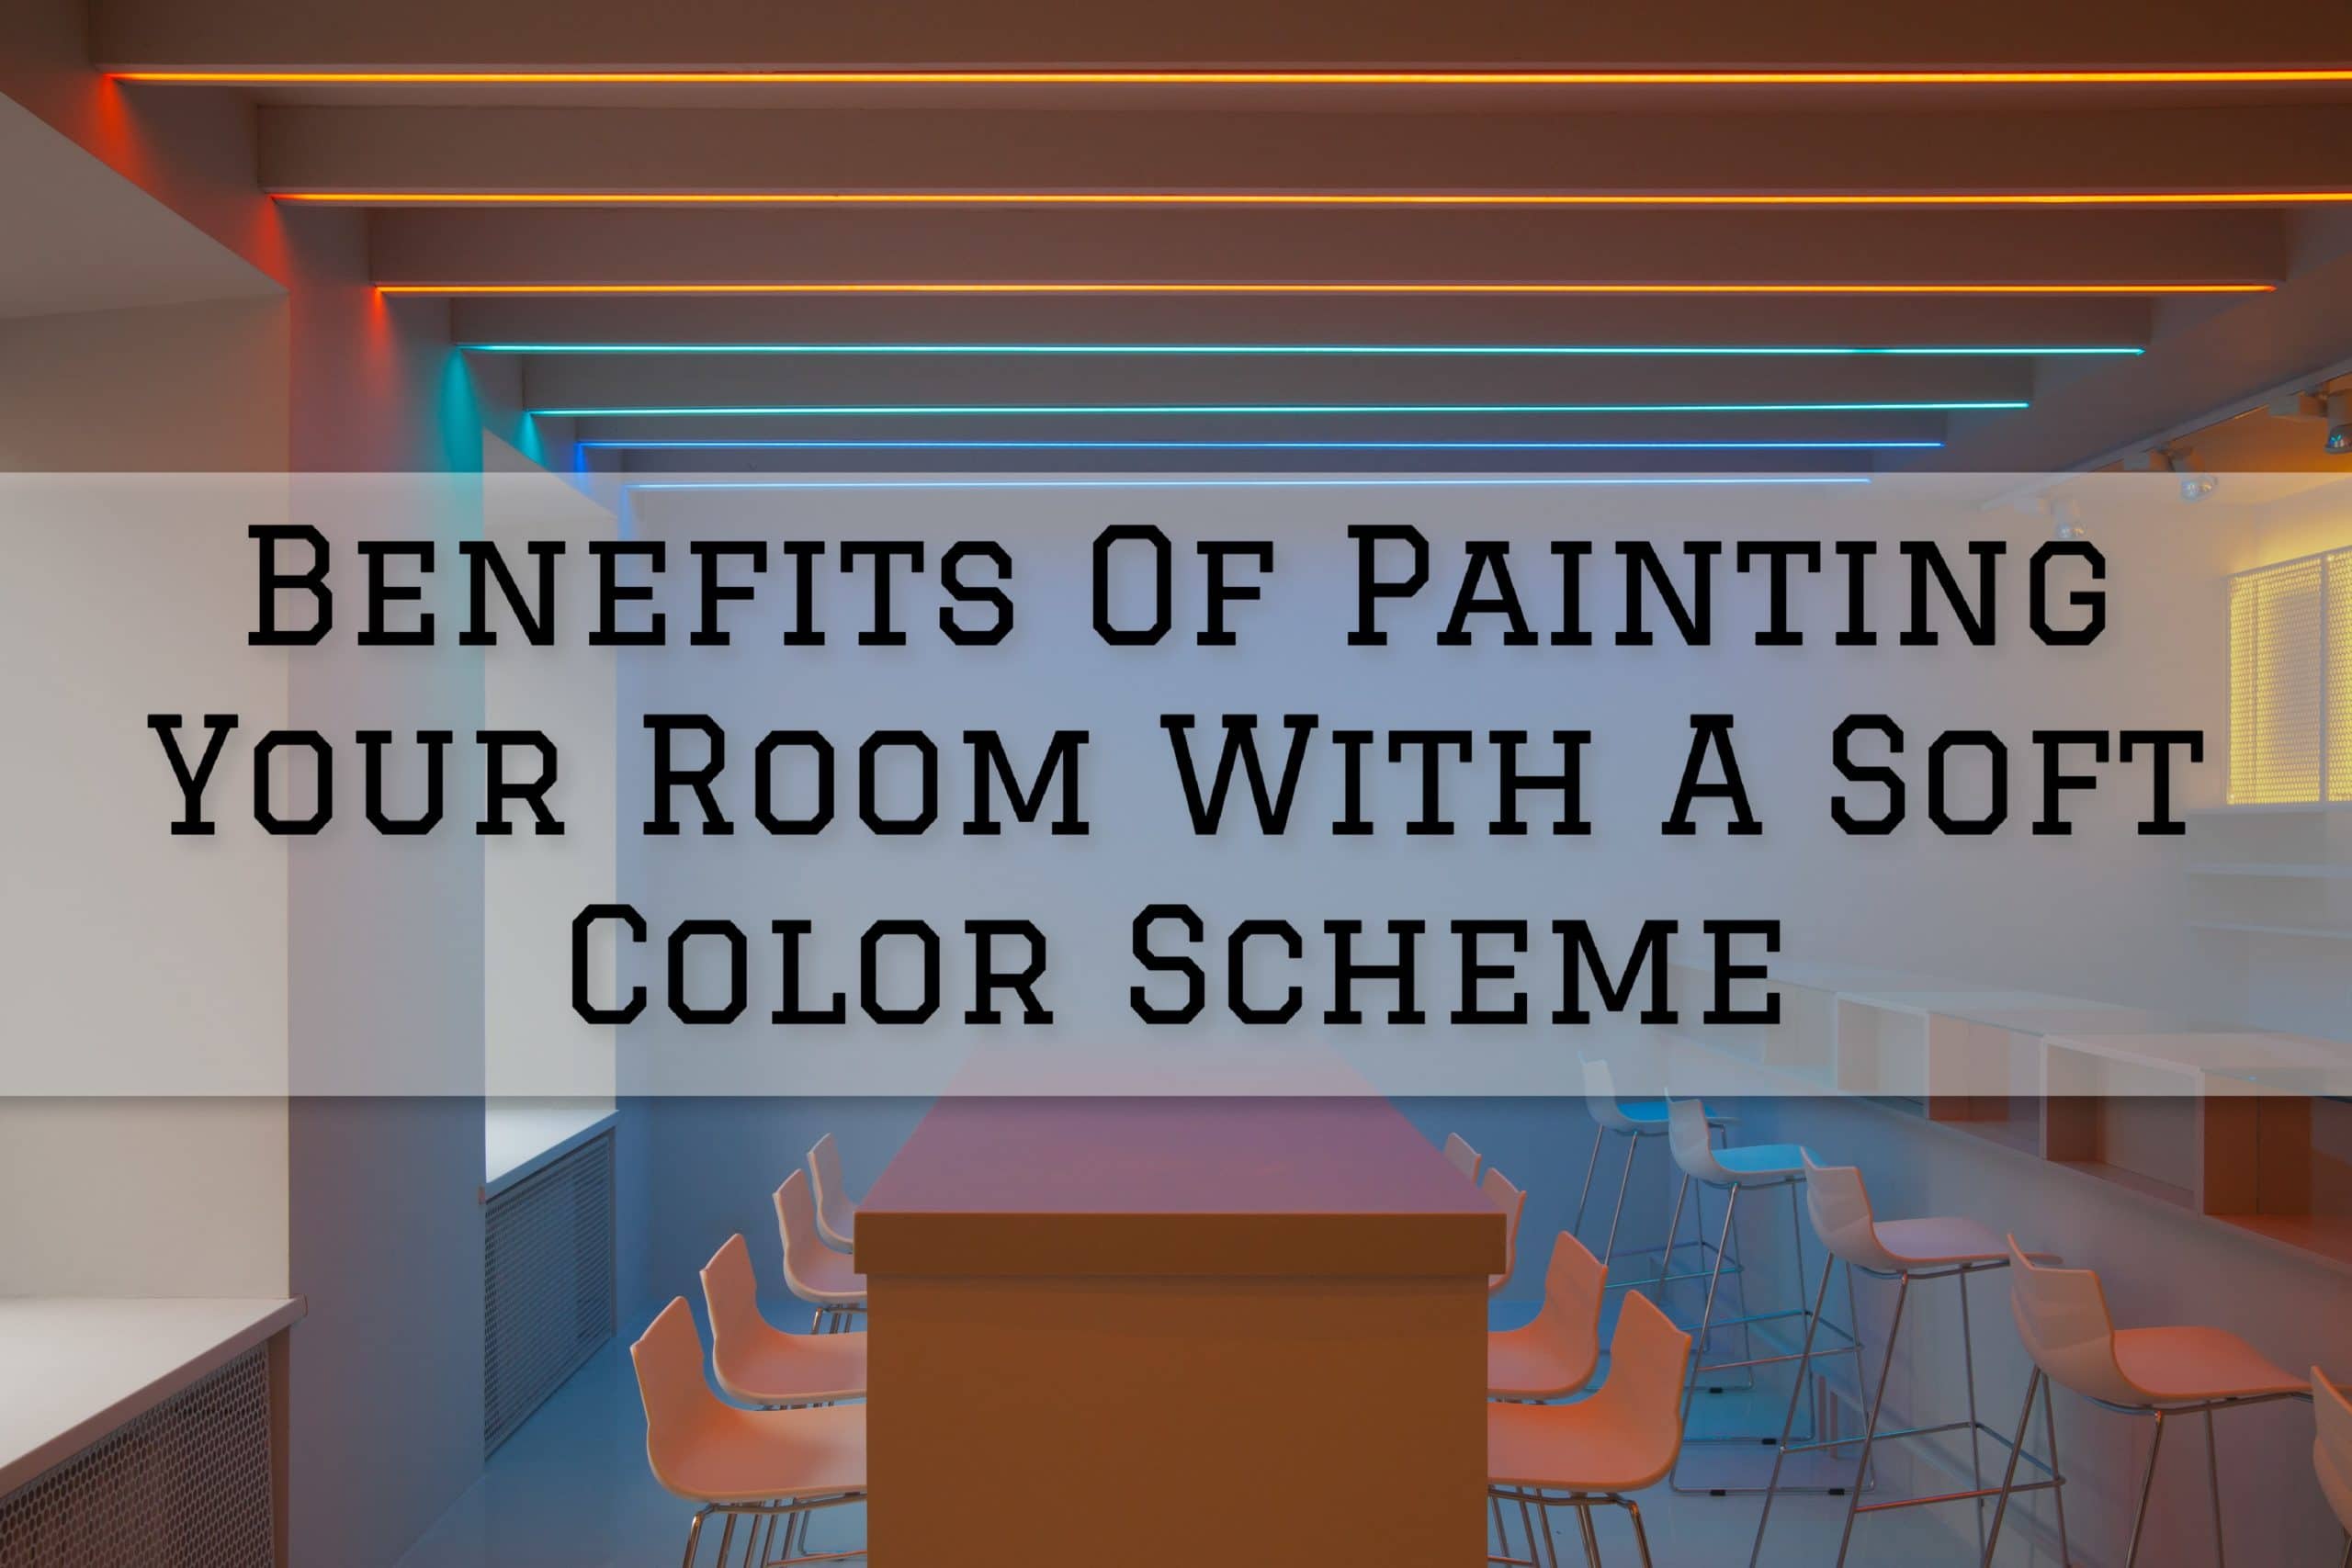 2022 05 21 Prime Painting Phoenix AZ Benefits Of Painting Your Room With A Soft Color Scheme Scaled 1 